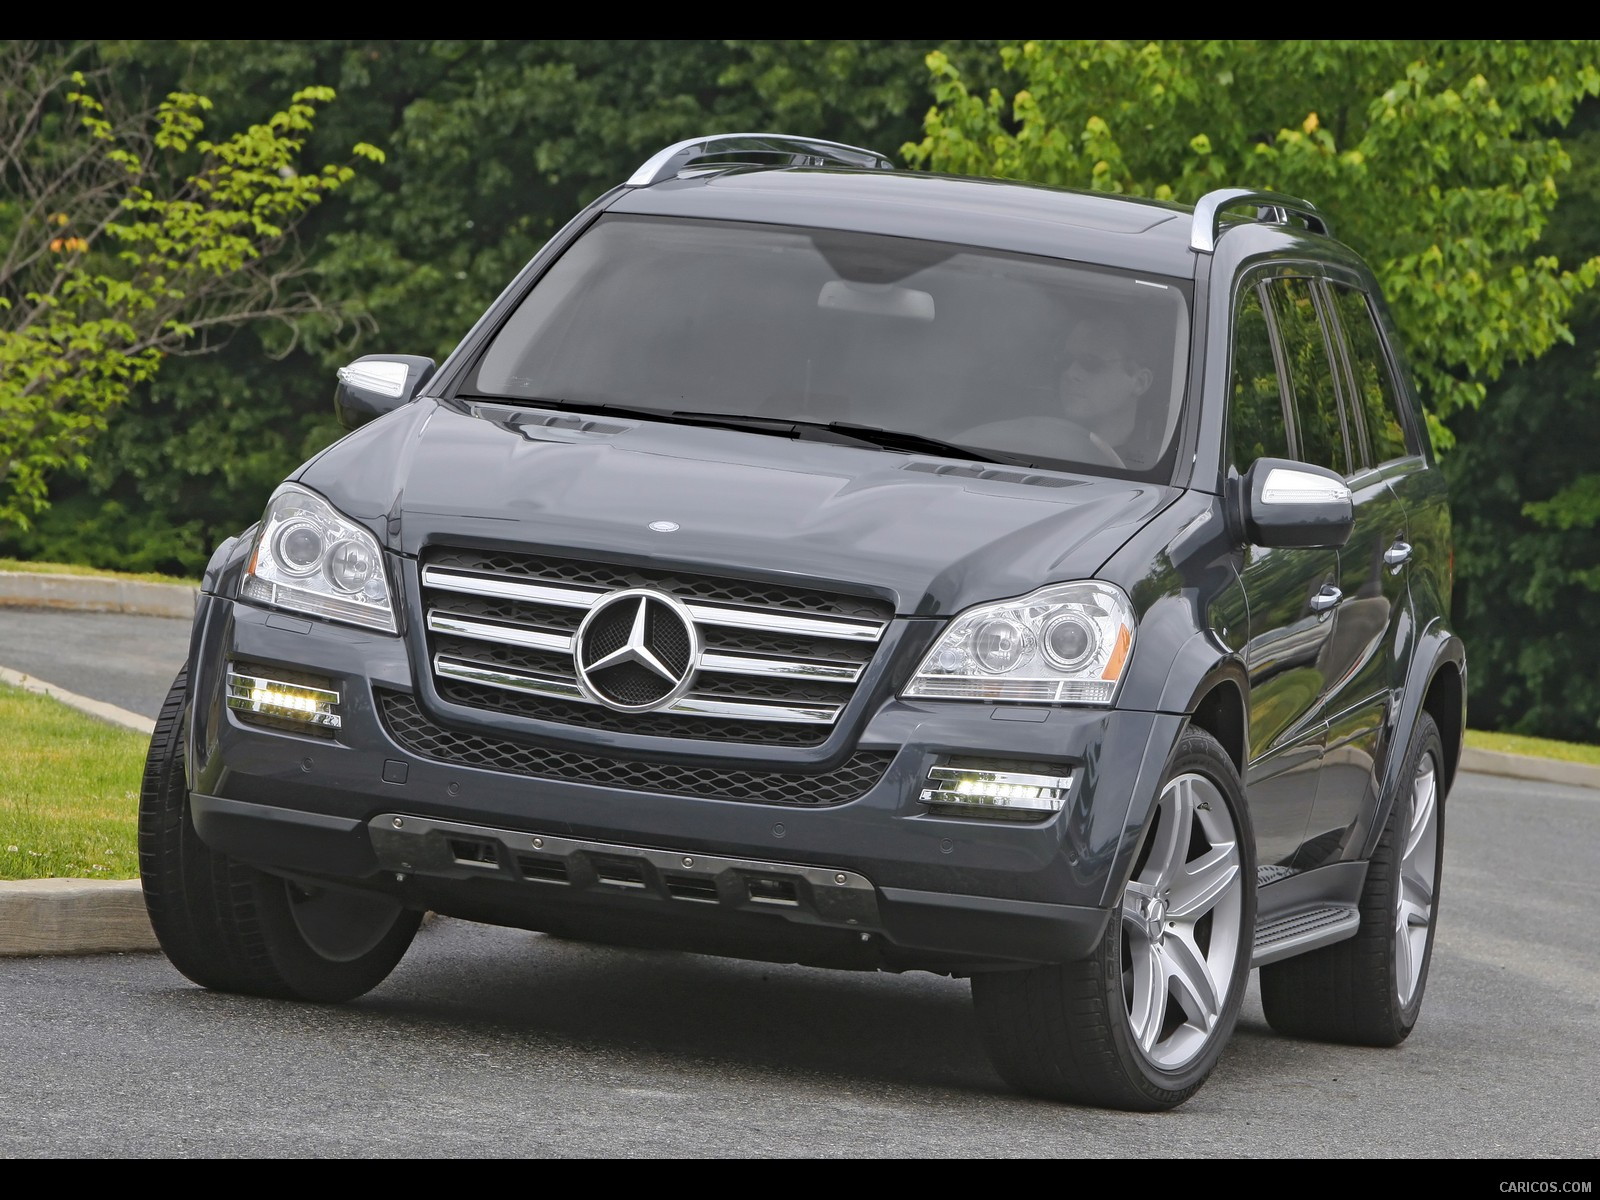 2010 Mercedes-Benz GL550 - Front, #41 of 112